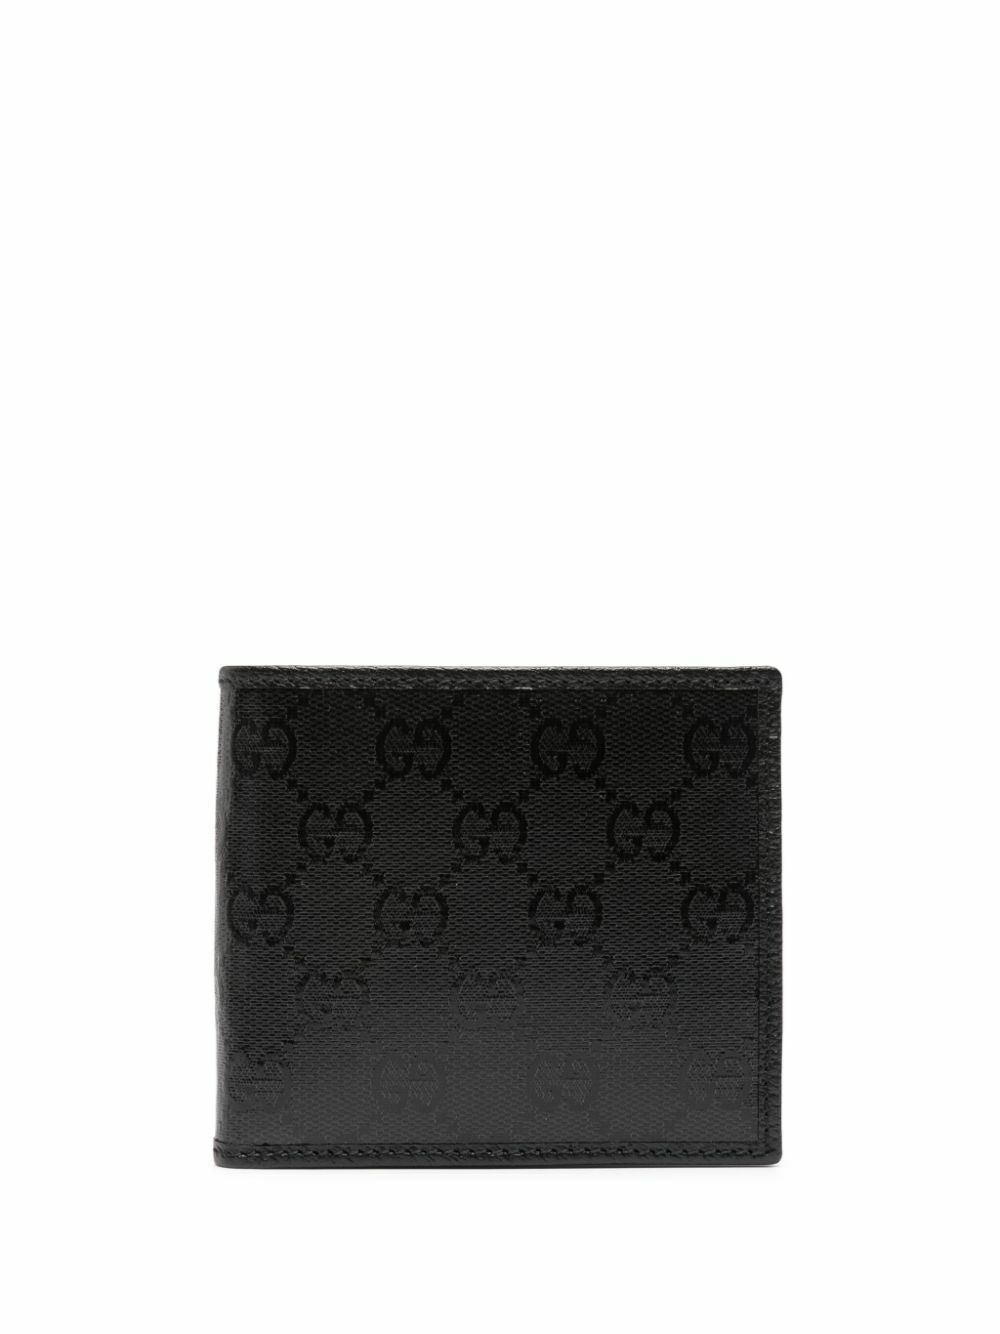 GUCCI - Leather Wallet Gucci